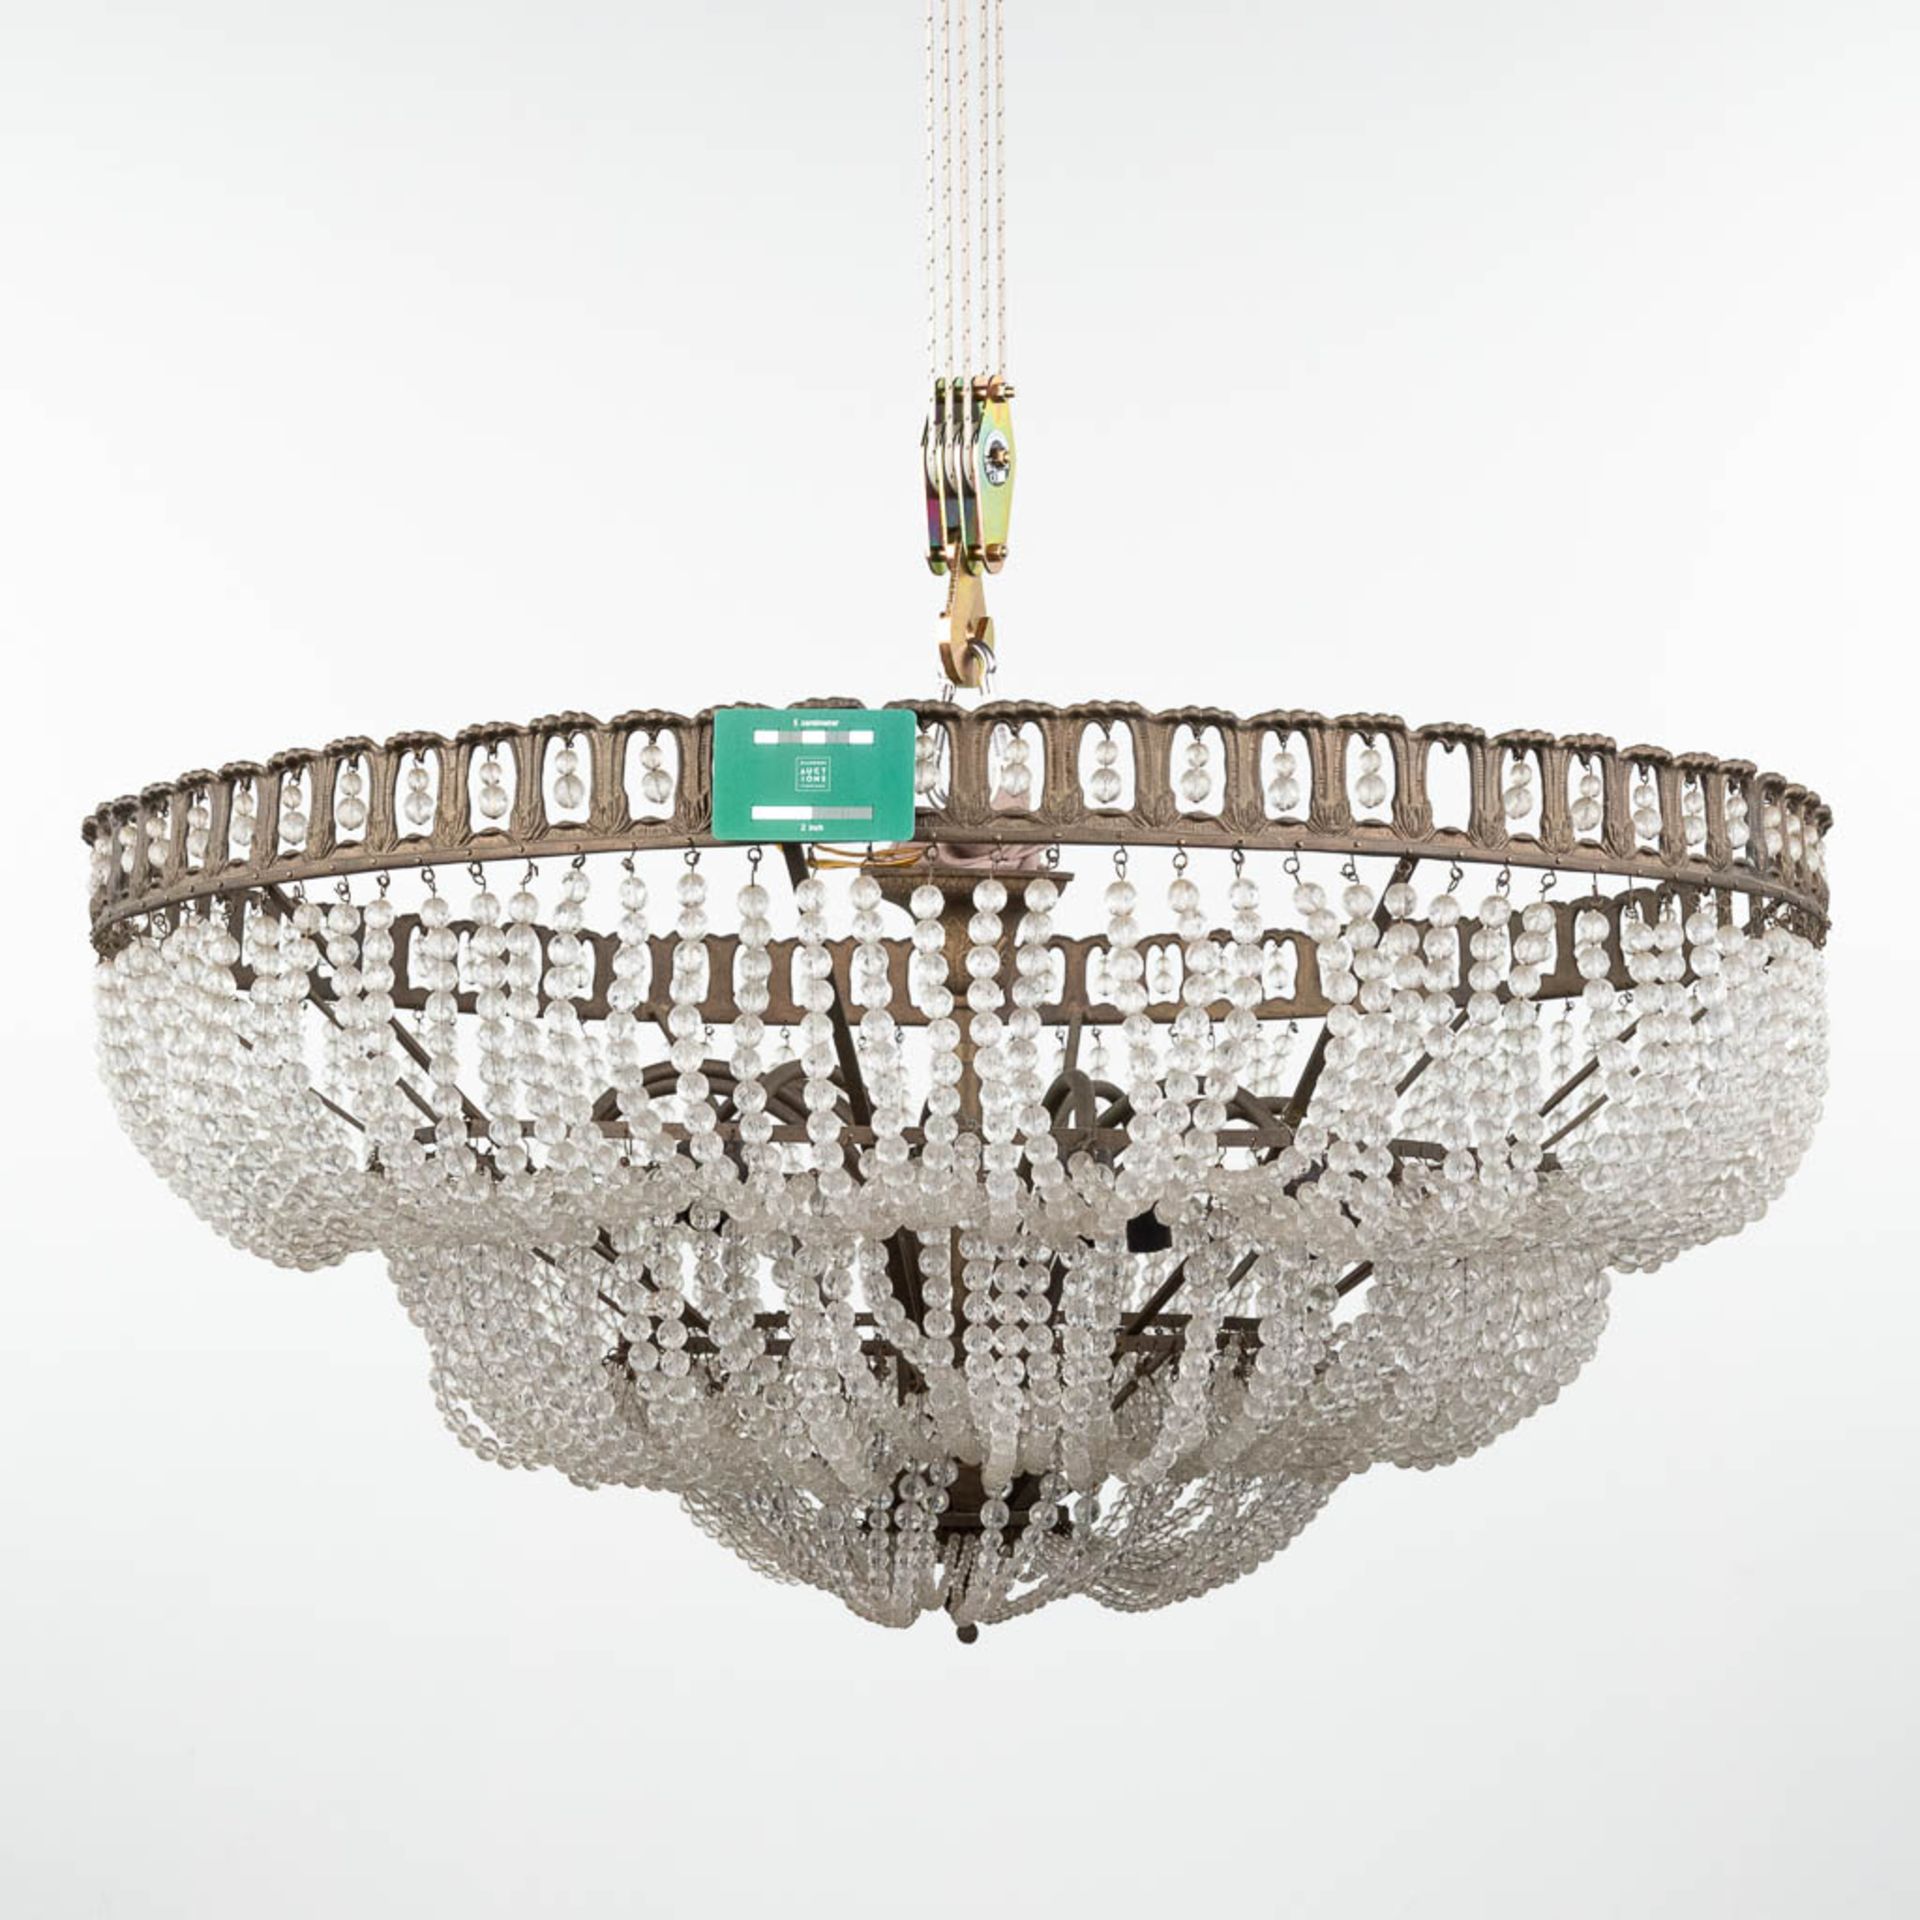 A large chandelier 'Sac A Perles' made of brass and glass. (H:40 x D:91 cm) - Image 2 of 12